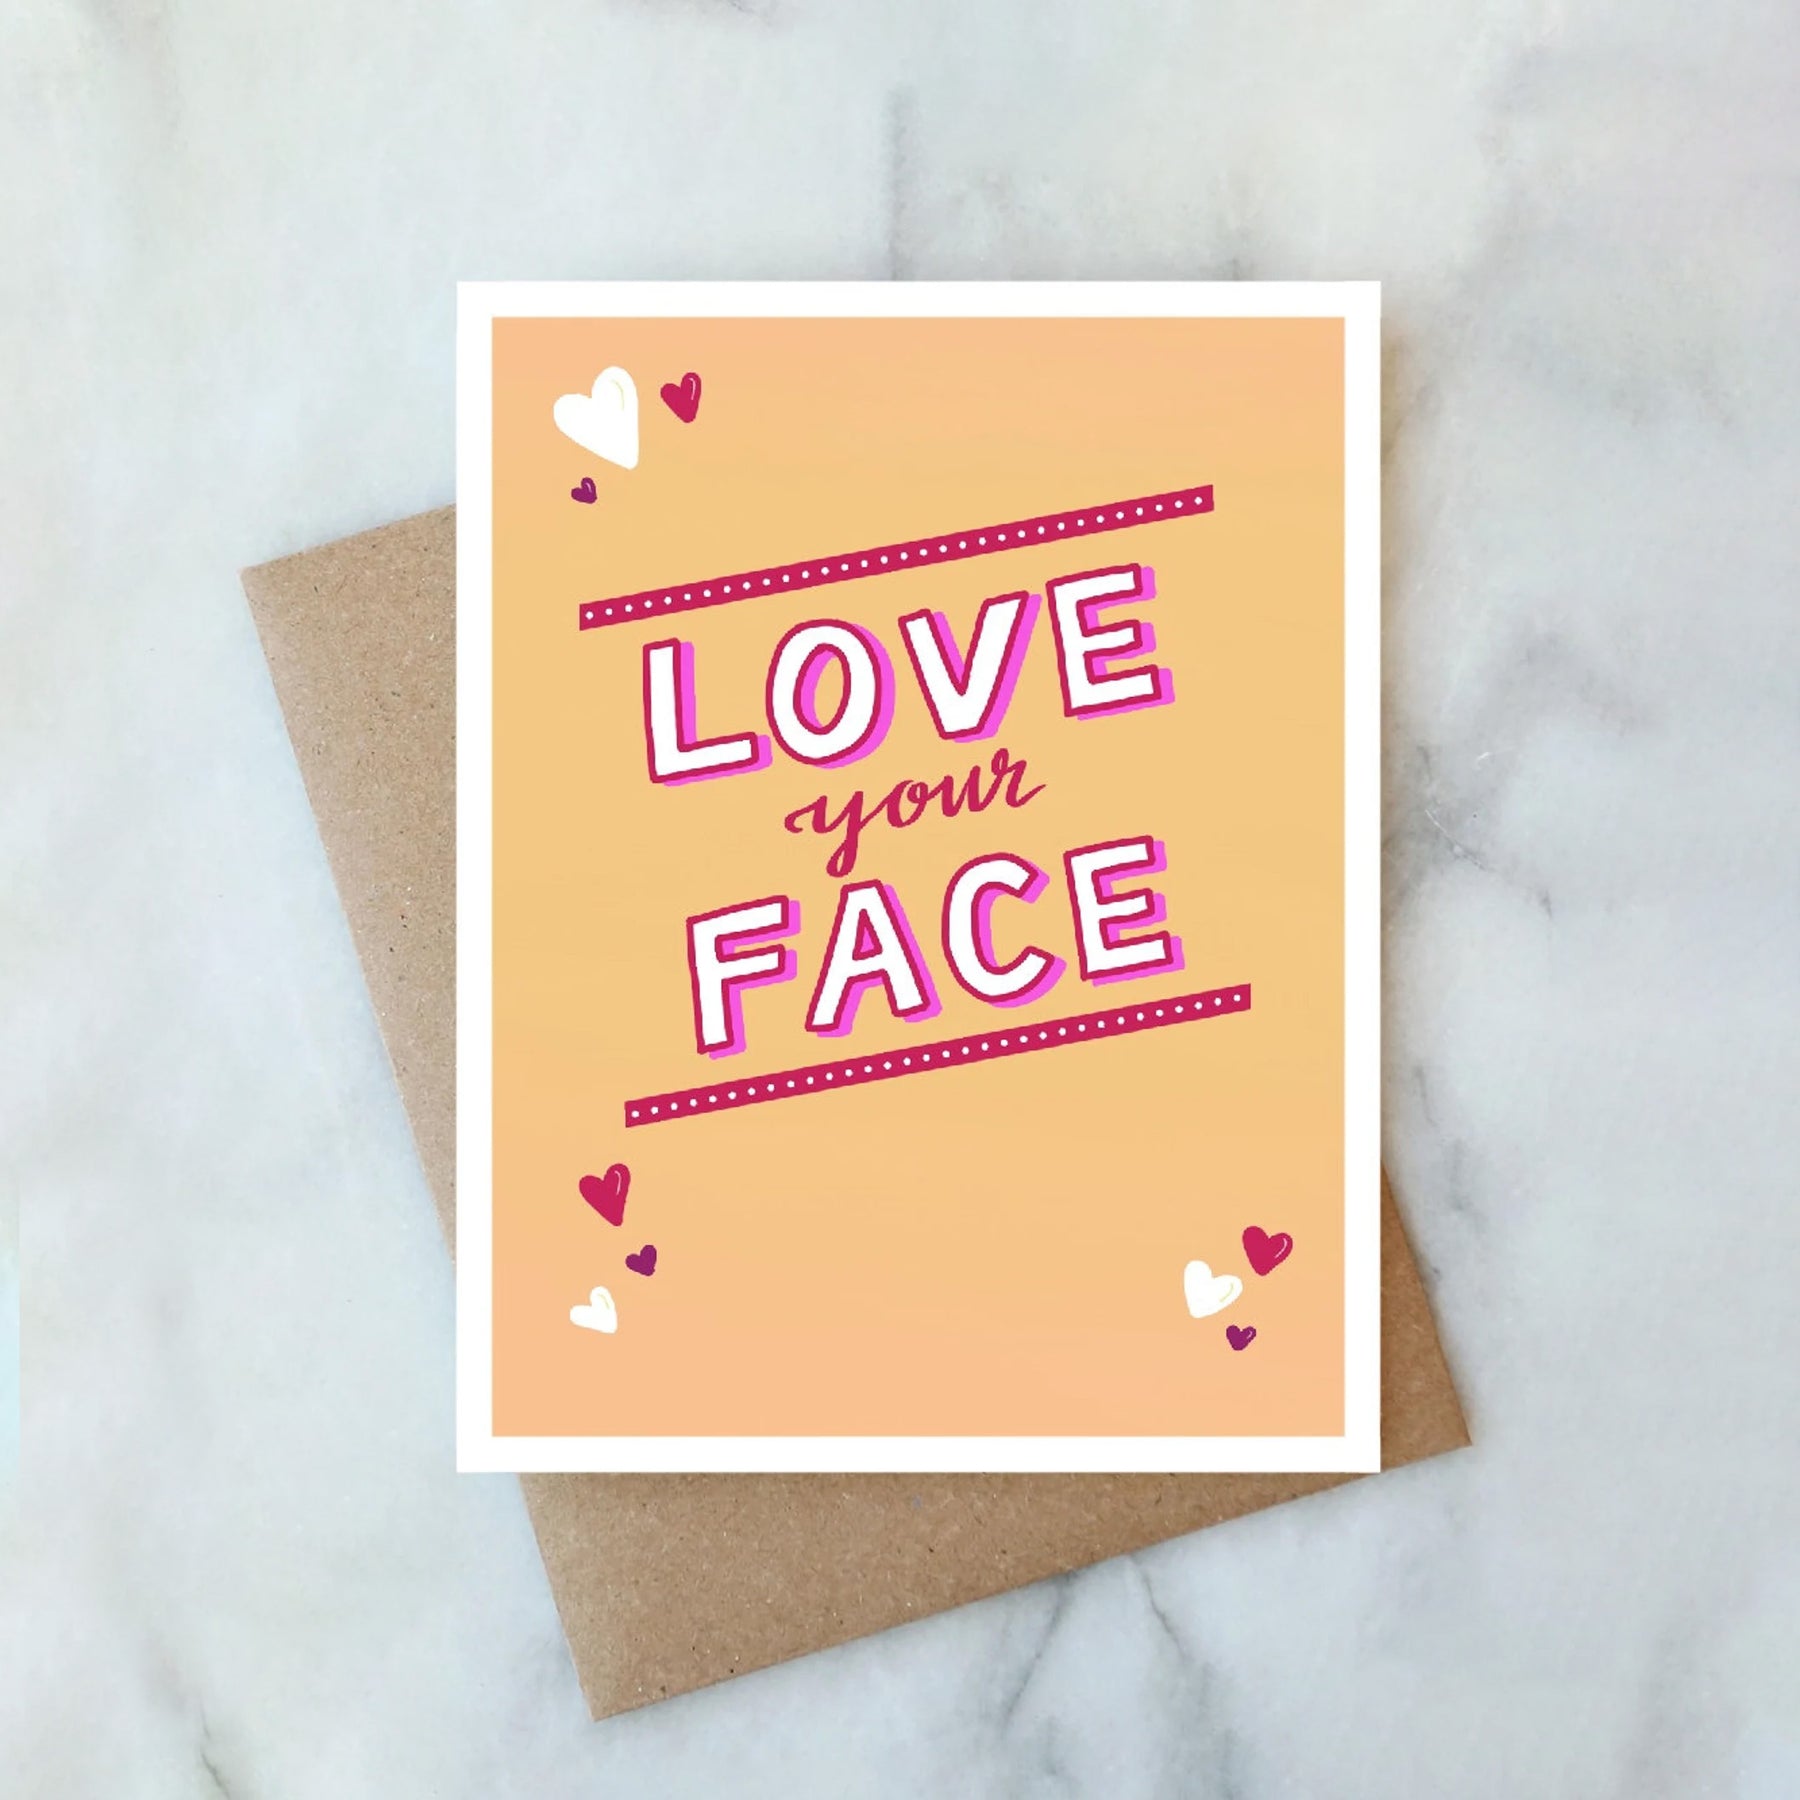 Love your face - Greeting Card